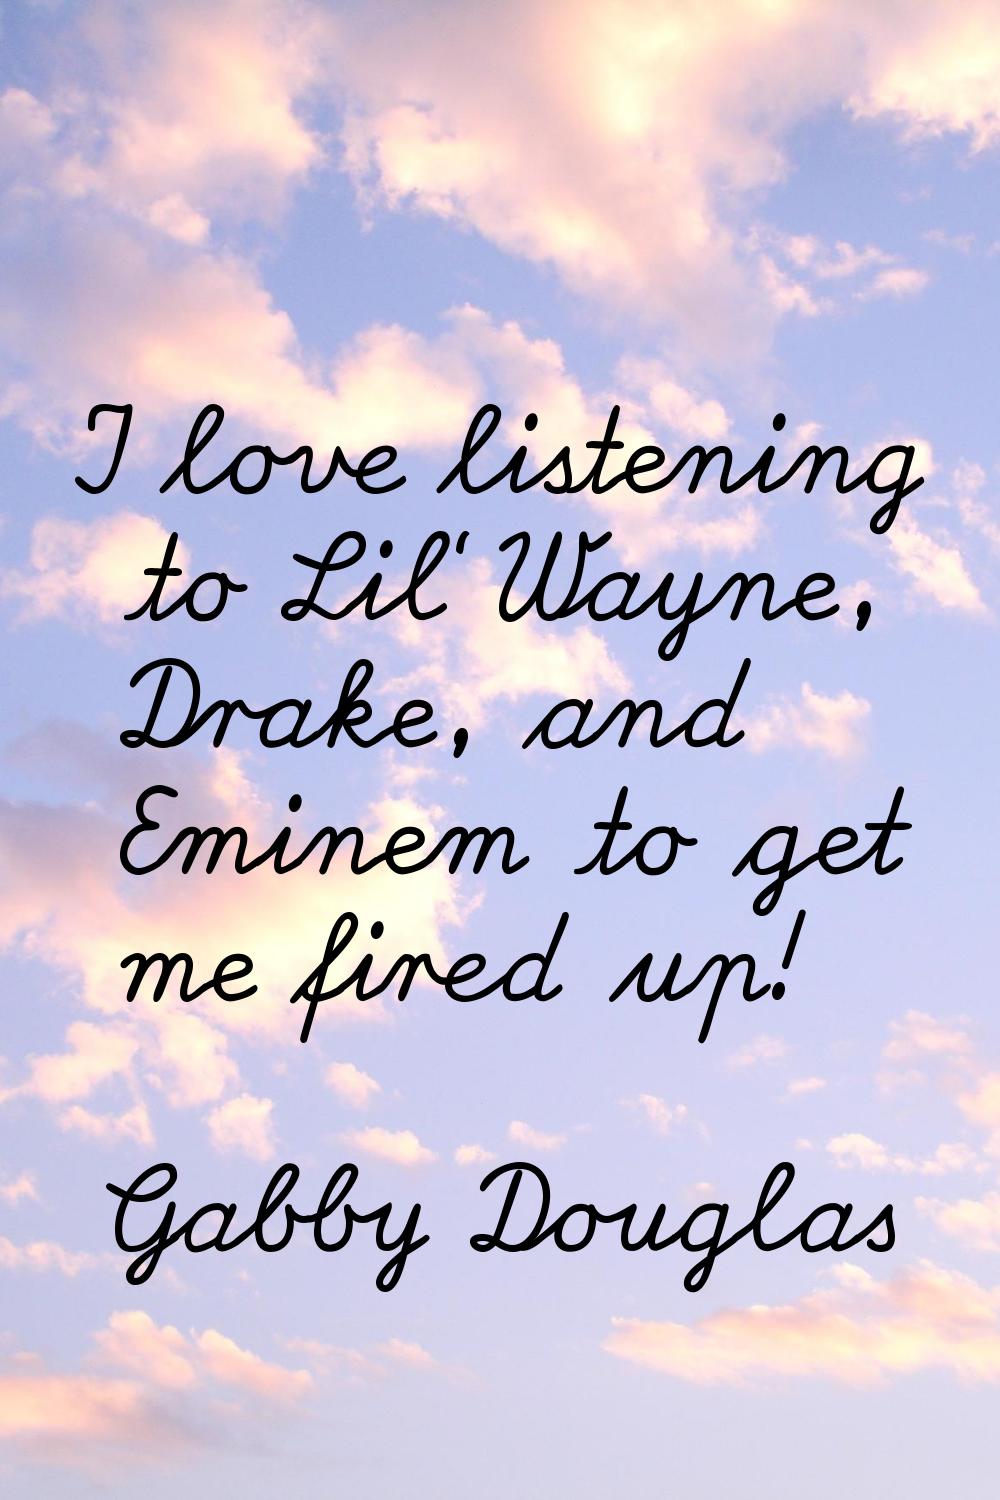 I love listening to Lil' Wayne, Drake, and Eminem to get me fired up!